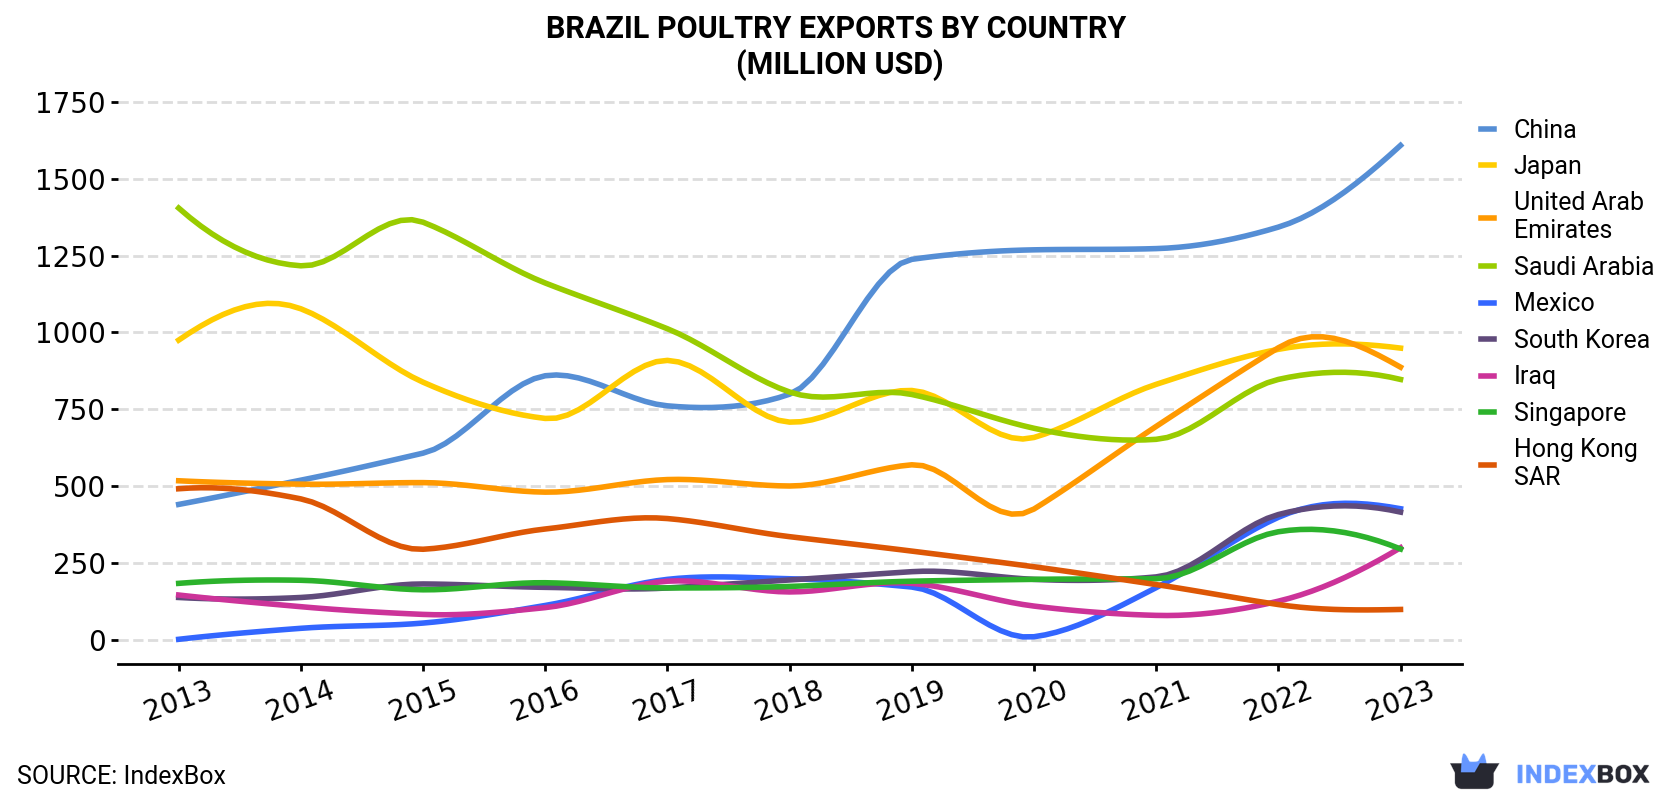 Brazil Poultry Exports By Country (Million USD)